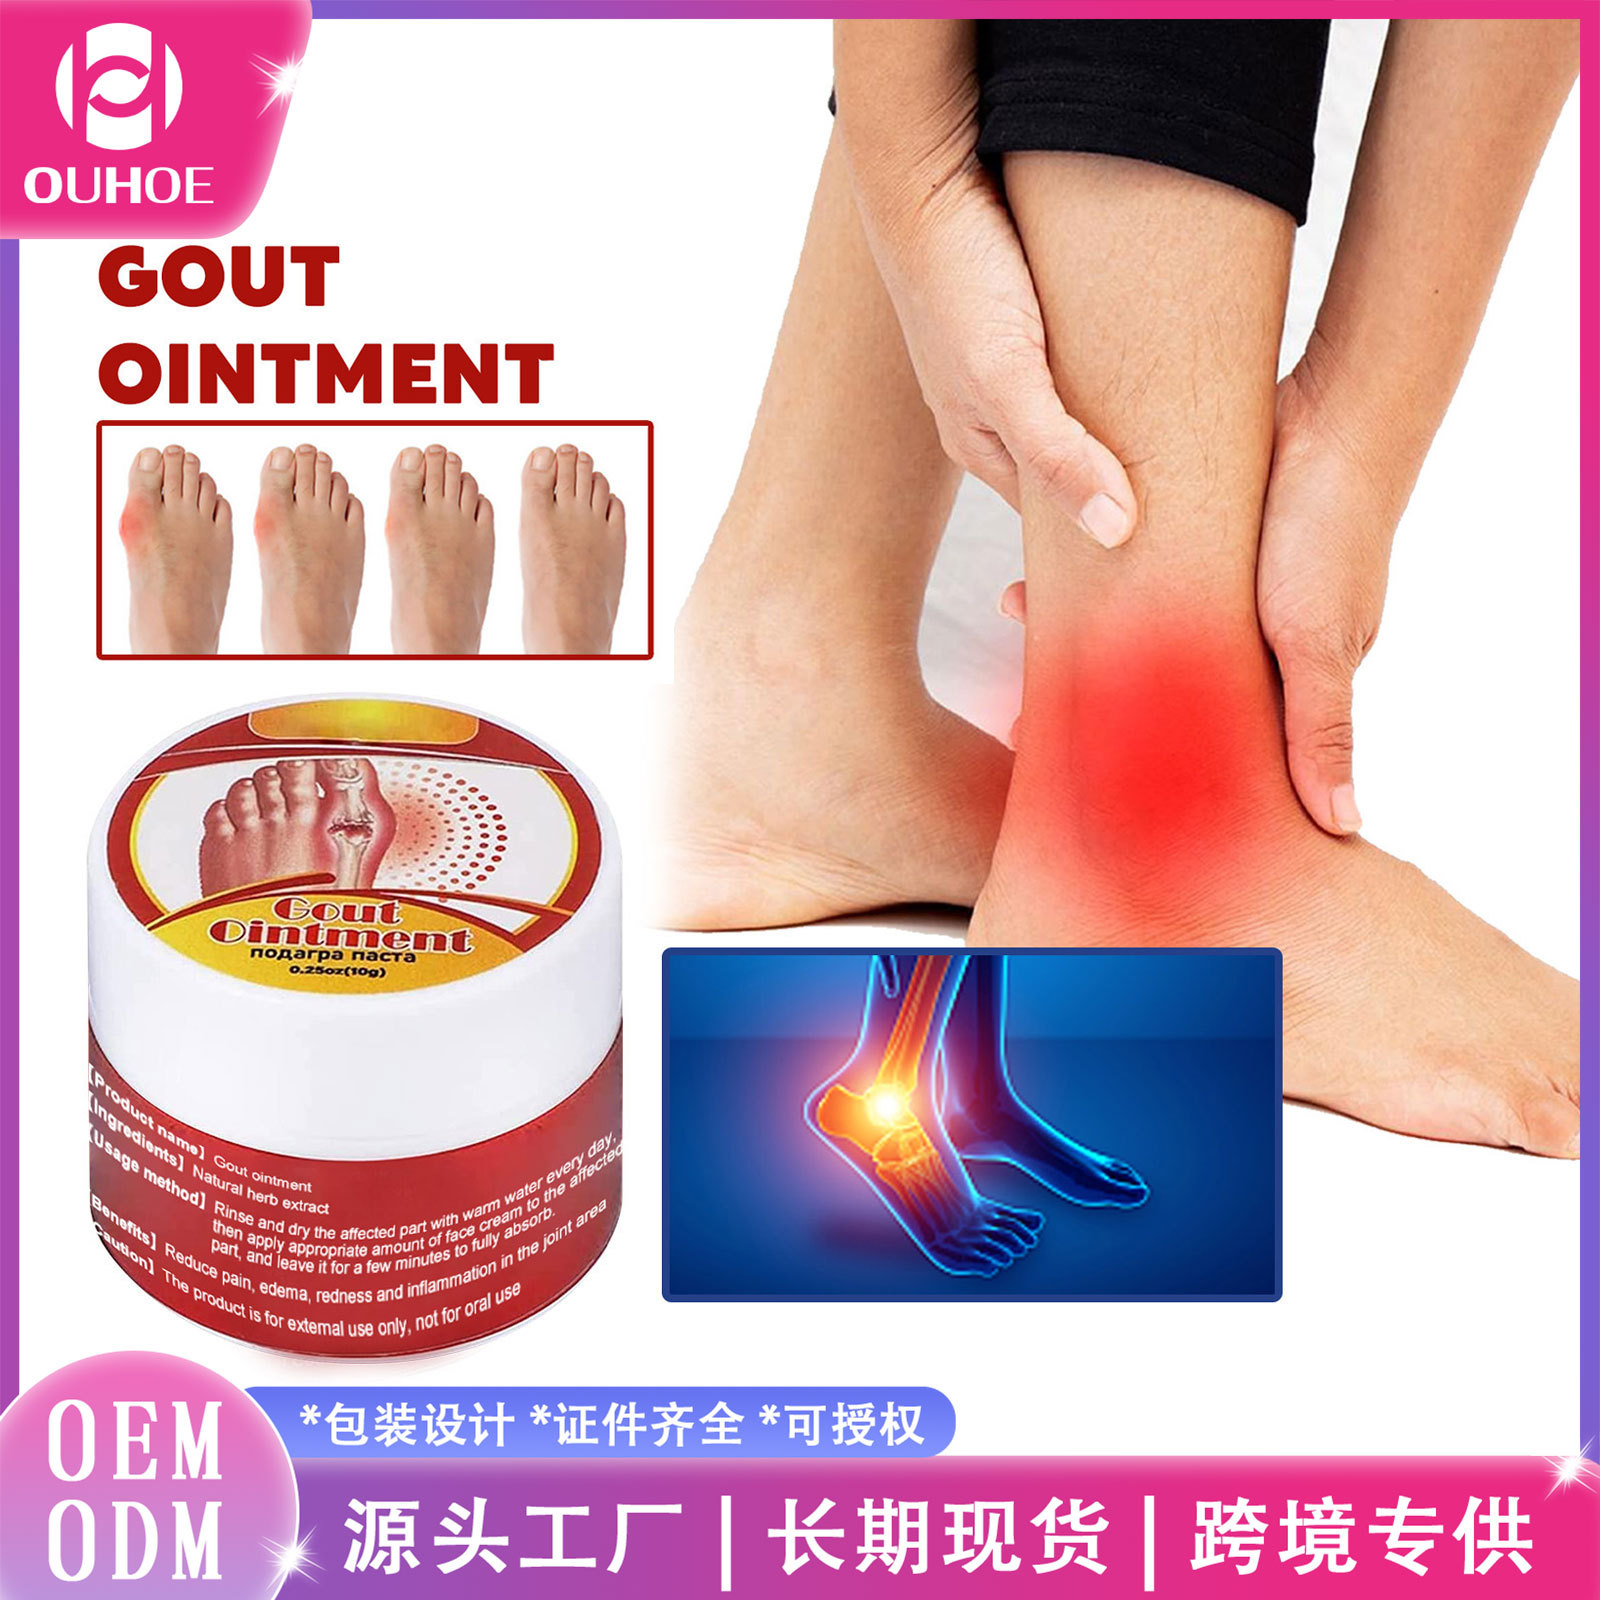 Ouhoe Joint Pain Ointment Activating Collaterals Muscles and Bones Thumb Ankle Joint Stiffness Pain Red Swelling Care Cream